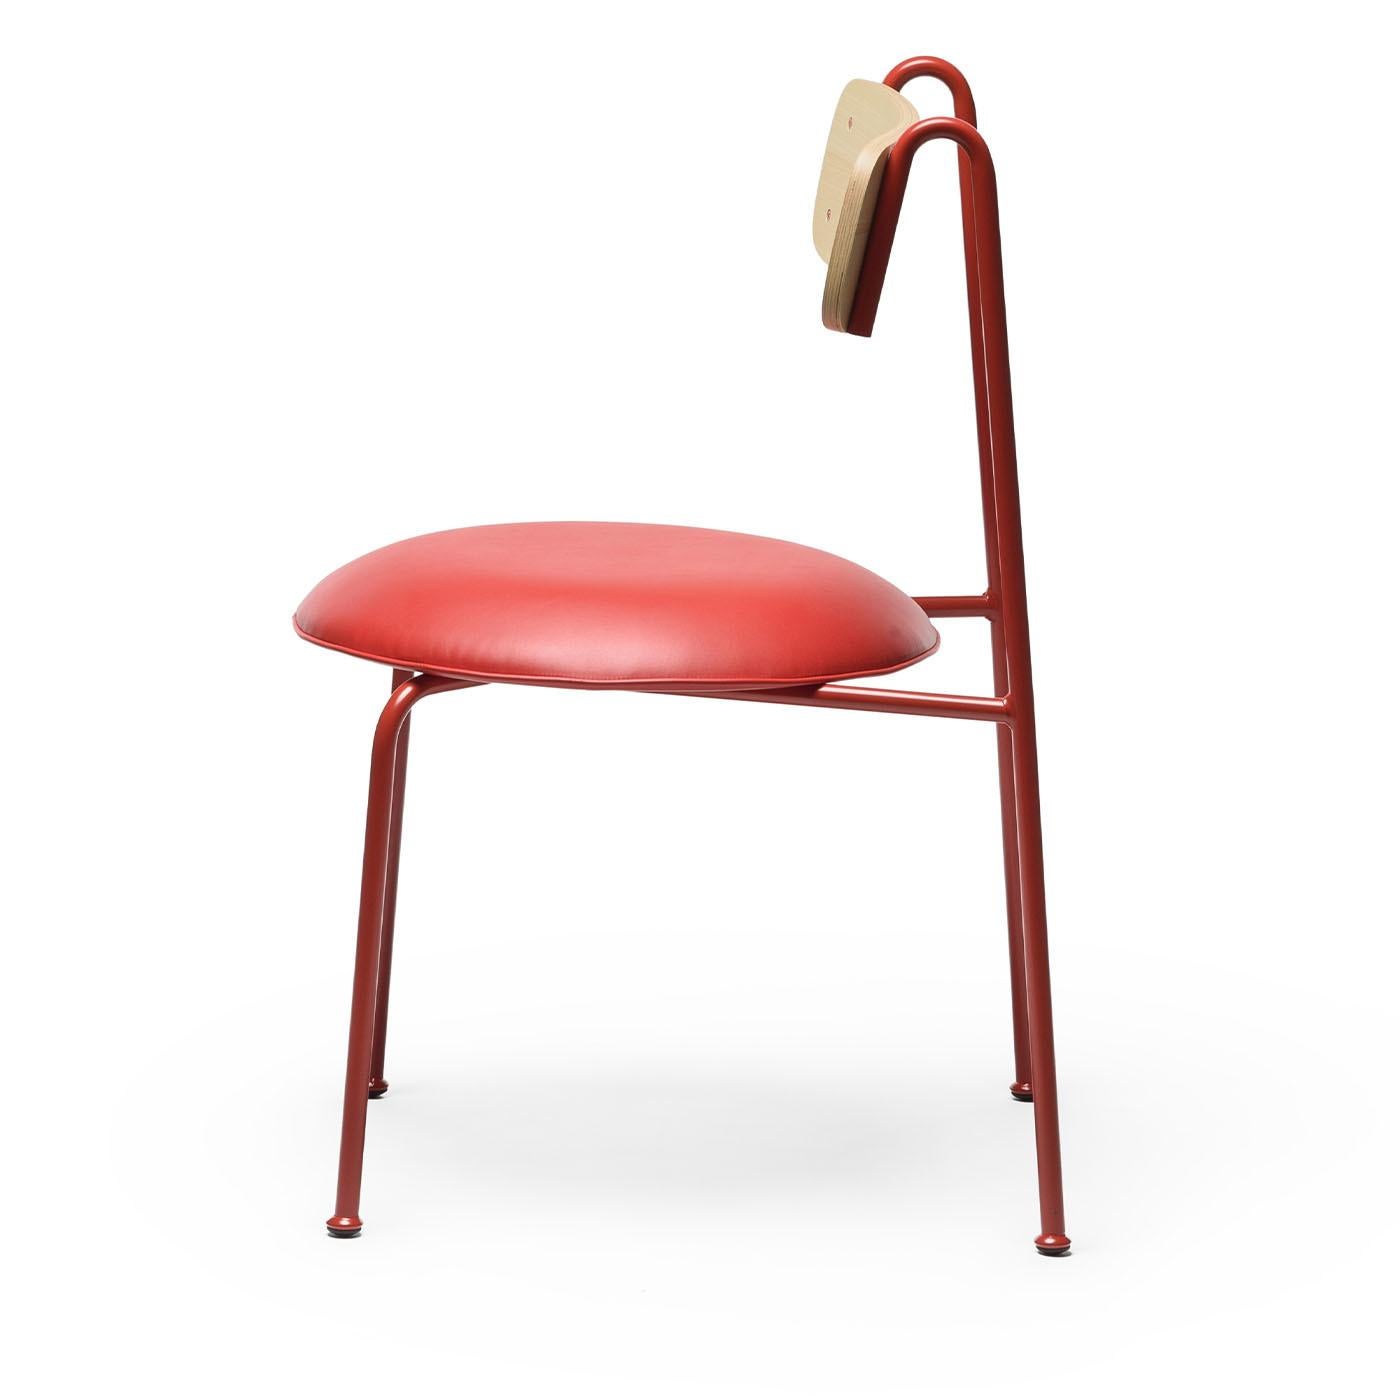 Contemporary Lena S Red And Natural Ash Chair By Designerd For Sale